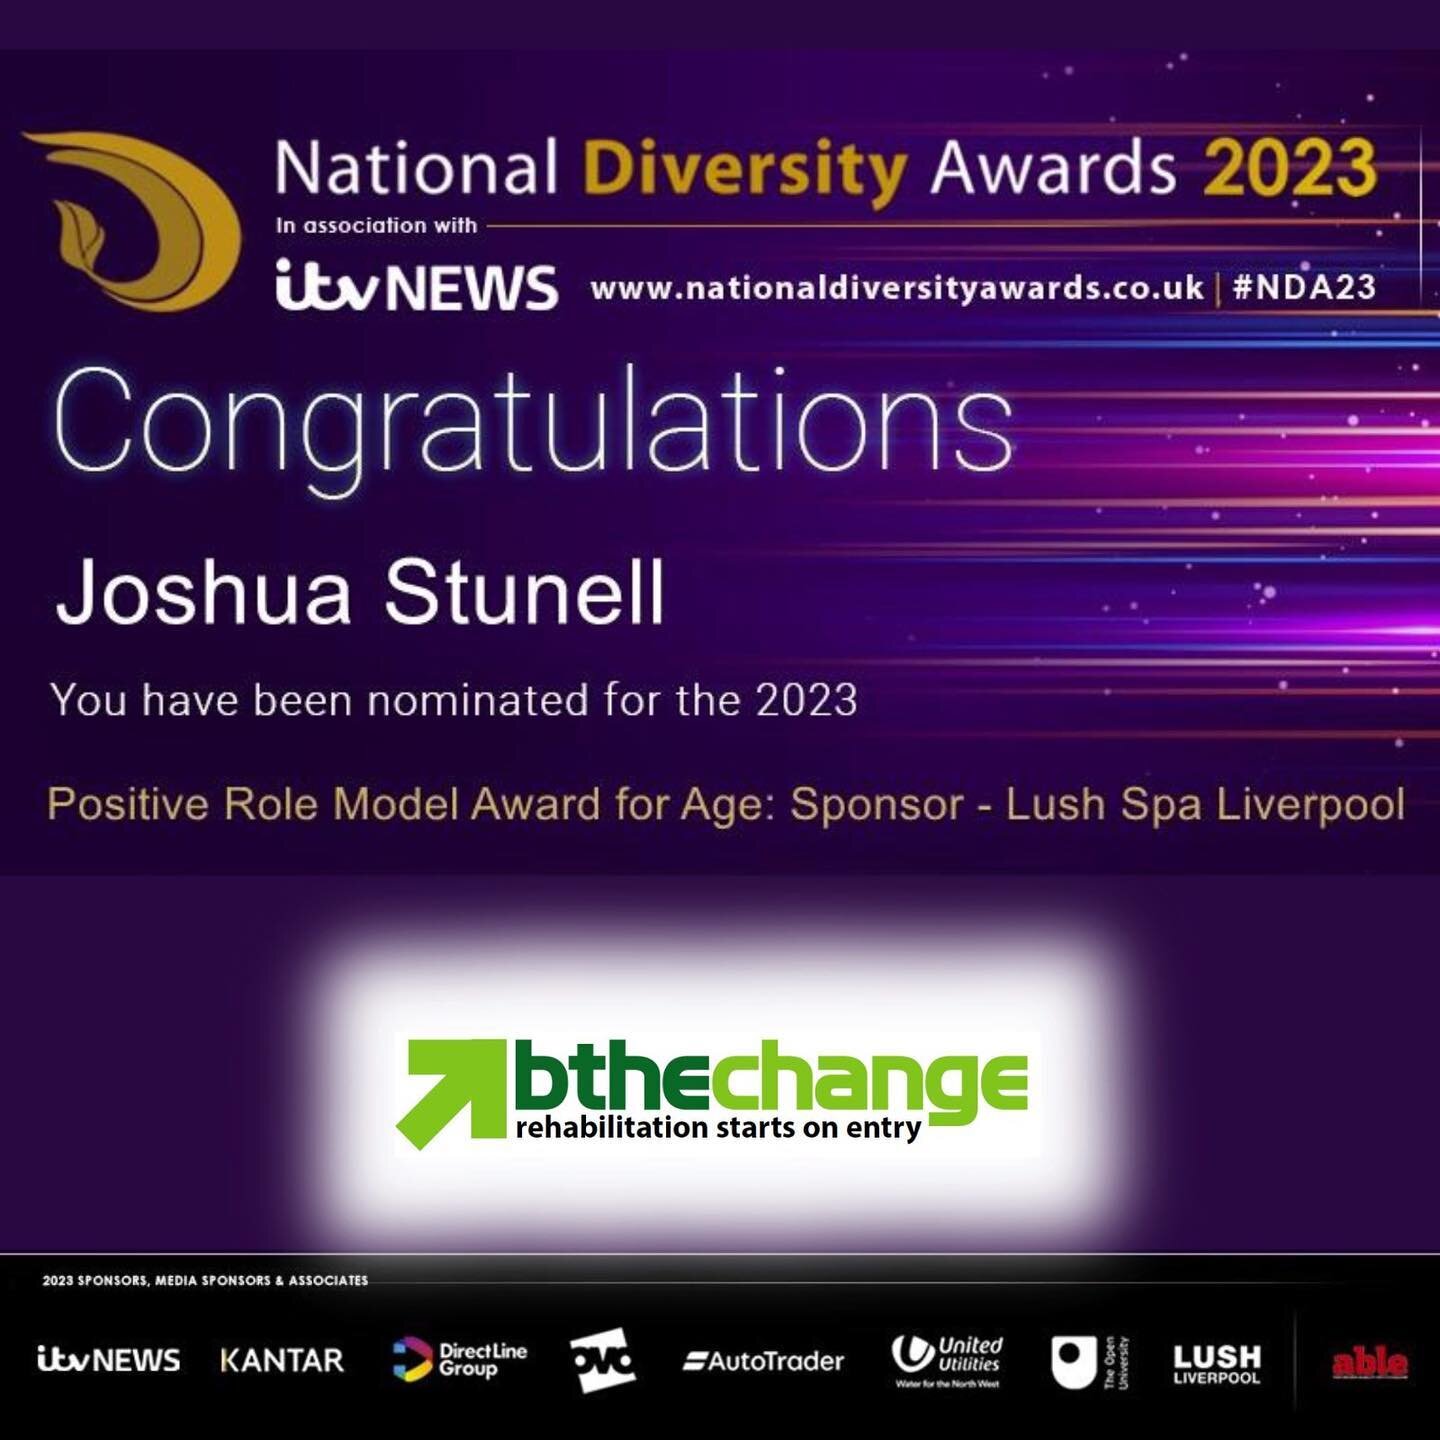 Massive congratulations to Founder &amp; CEO @bthechangecic and DCCS Panel member Josh!!

Nominated for the &lsquo;Positive Role Model&rsquo; award @ndawards - celebrating the outstanding achievements of grass-root communities ✨

#bthechange is an aw